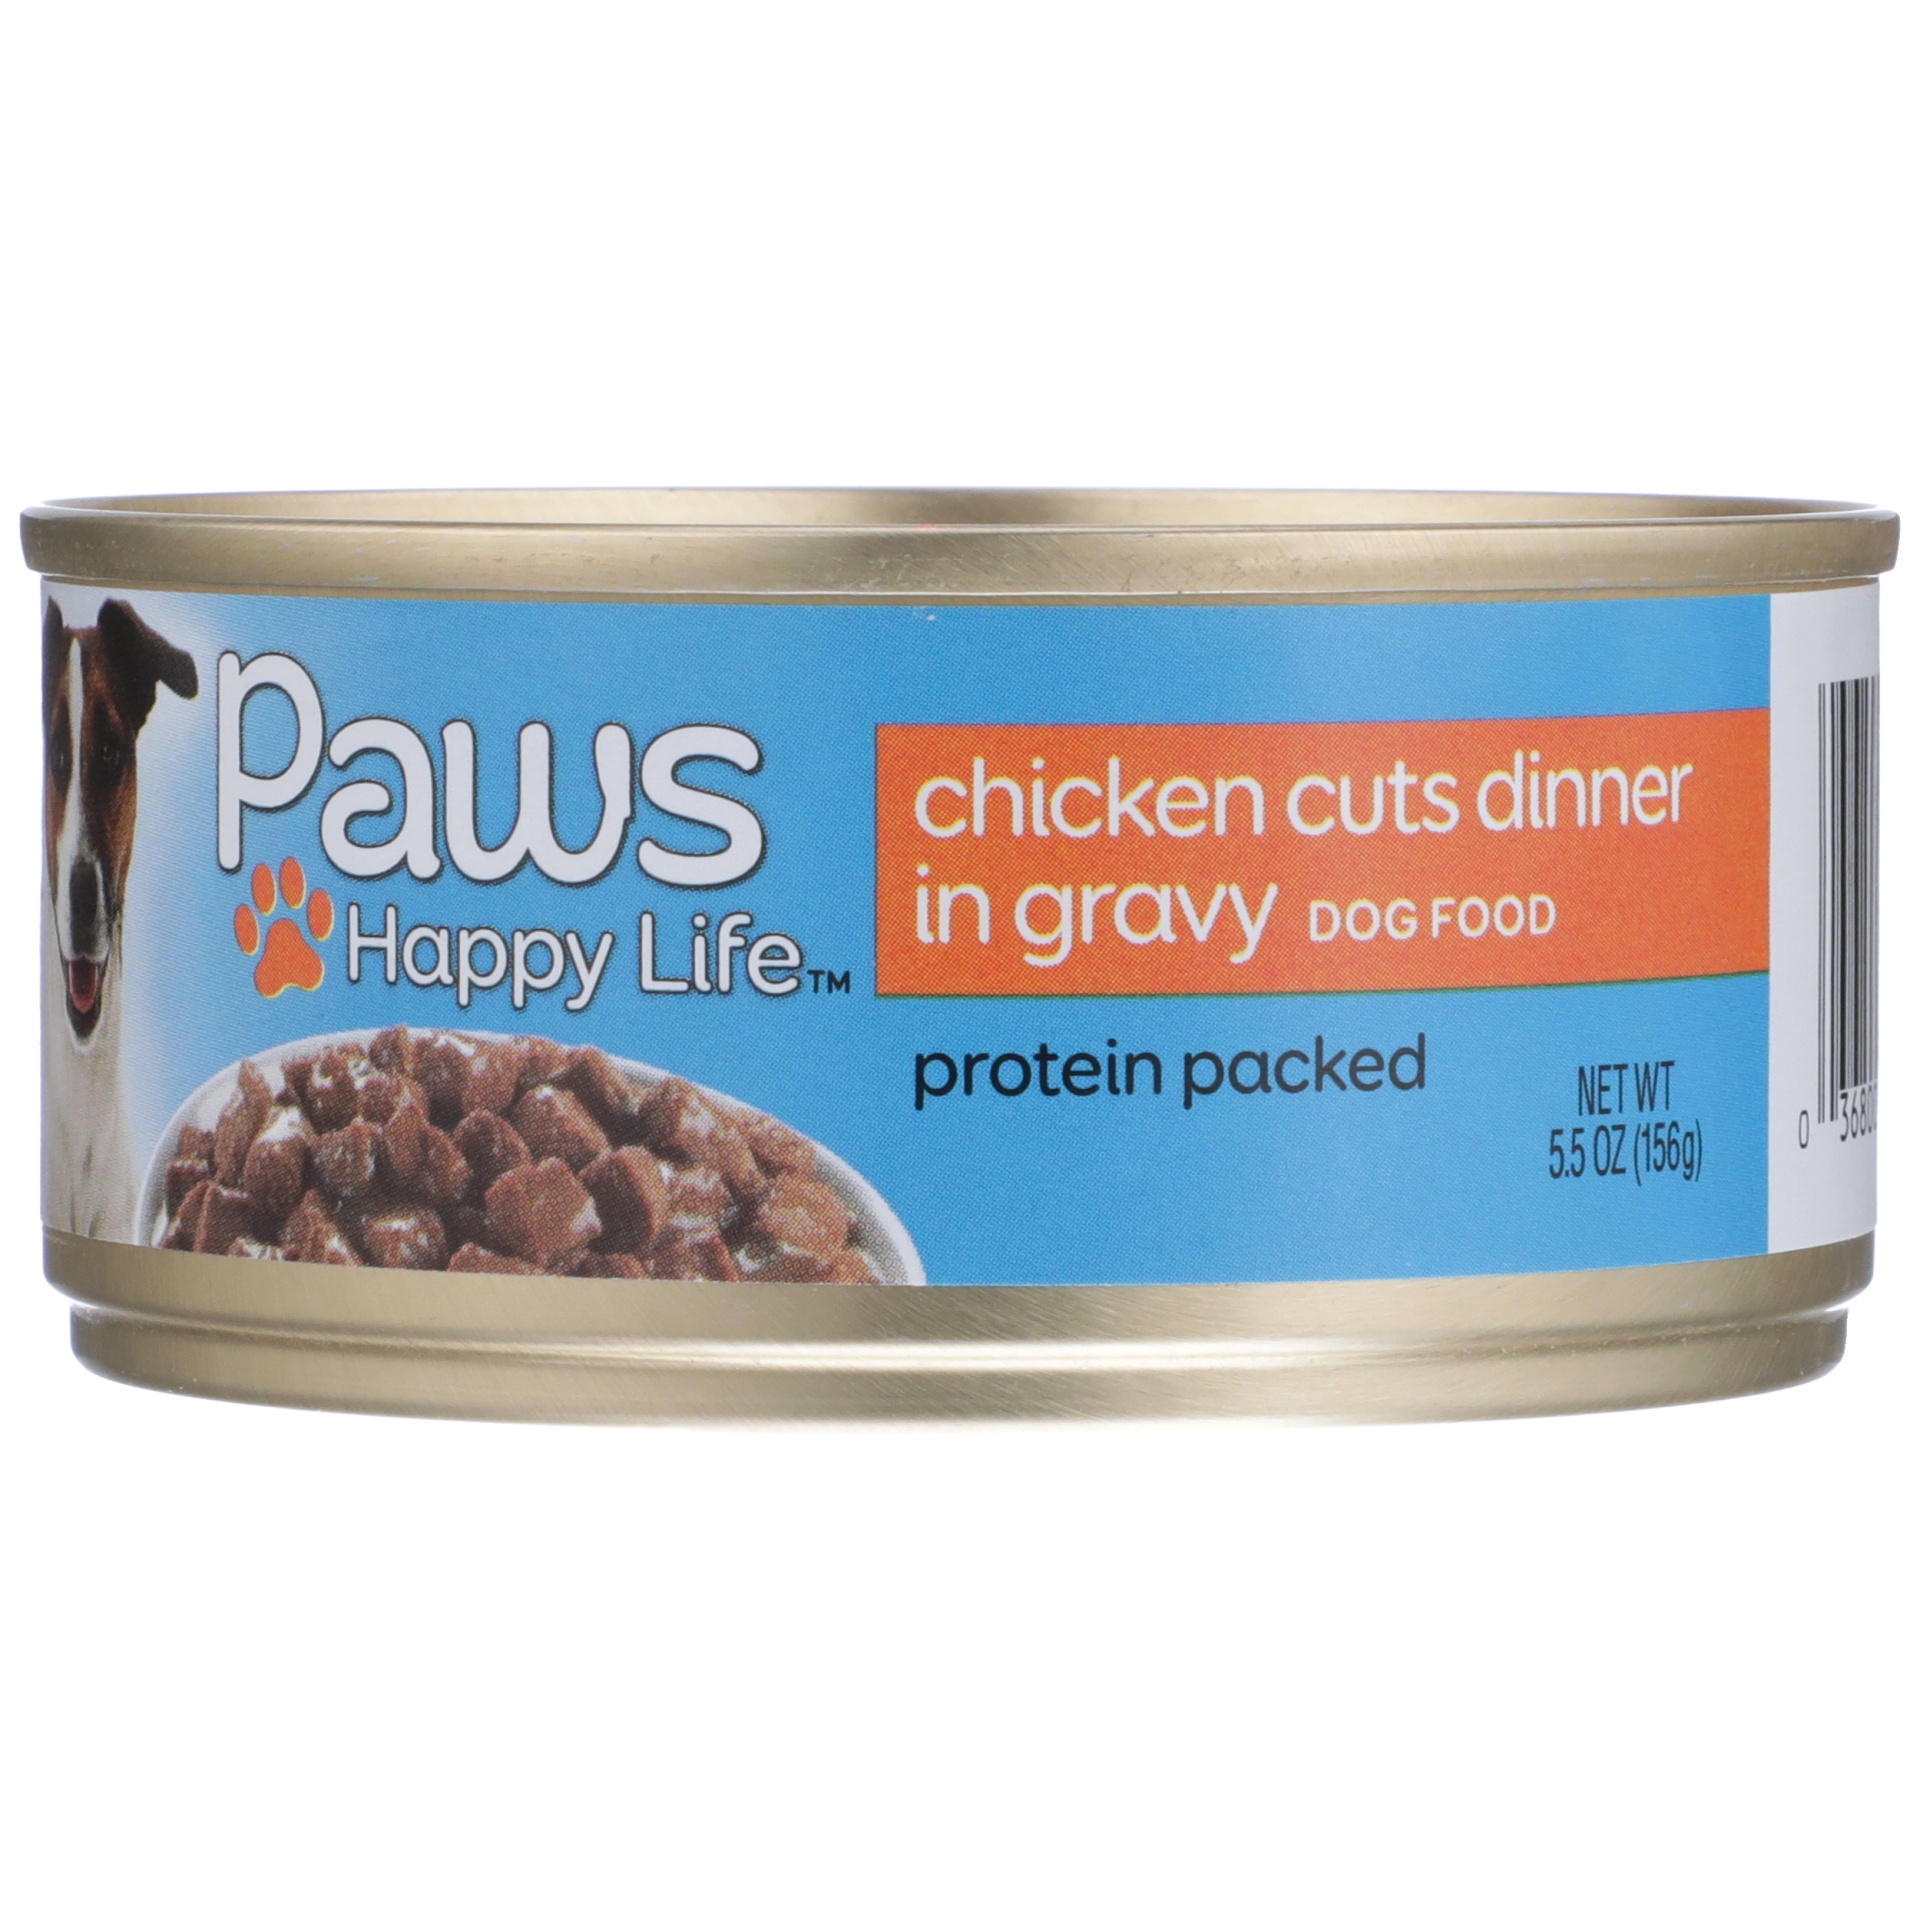 slide 1 of 1, Paws Happy Life Chicken Cuts Dinner In Gravy Dog Food, 5.5 oz